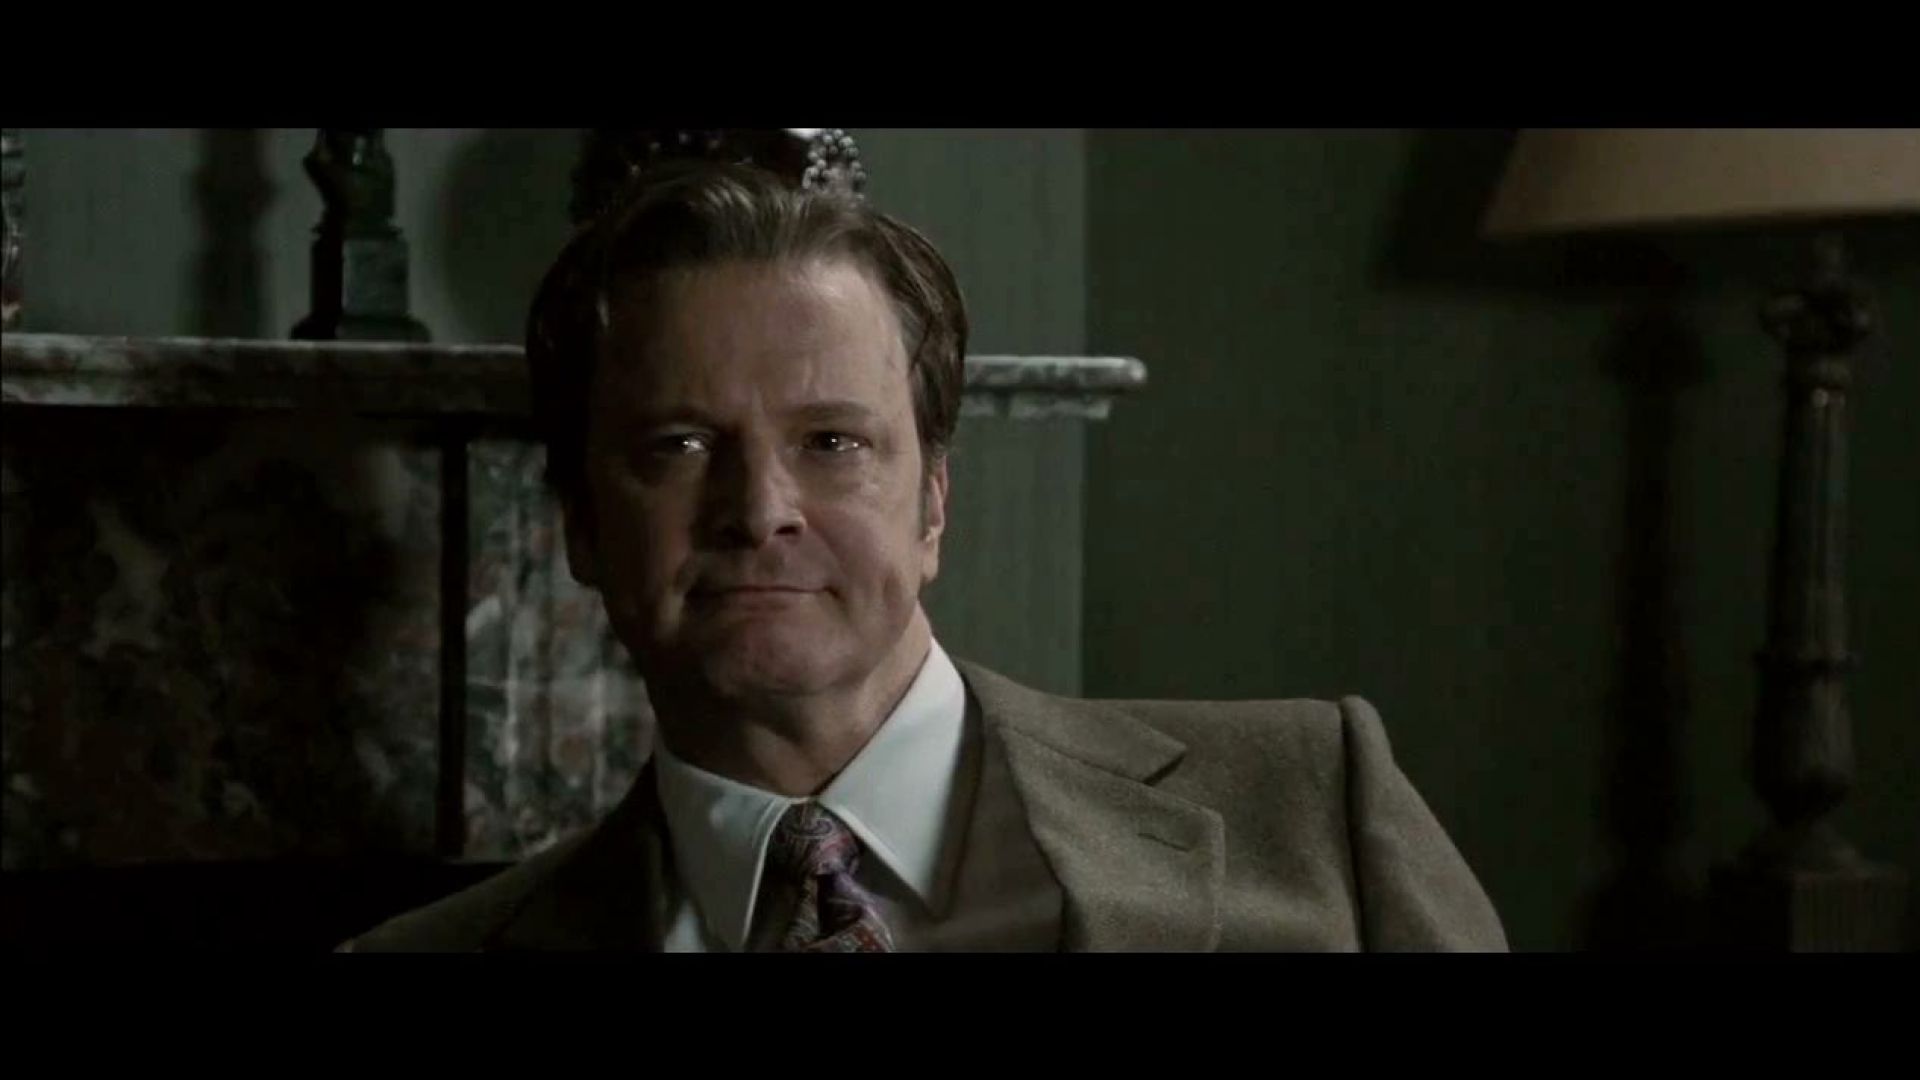 Gary Oldman finds Colin Firth in his house without shoes on in Tinker Tailor Soldier Spy